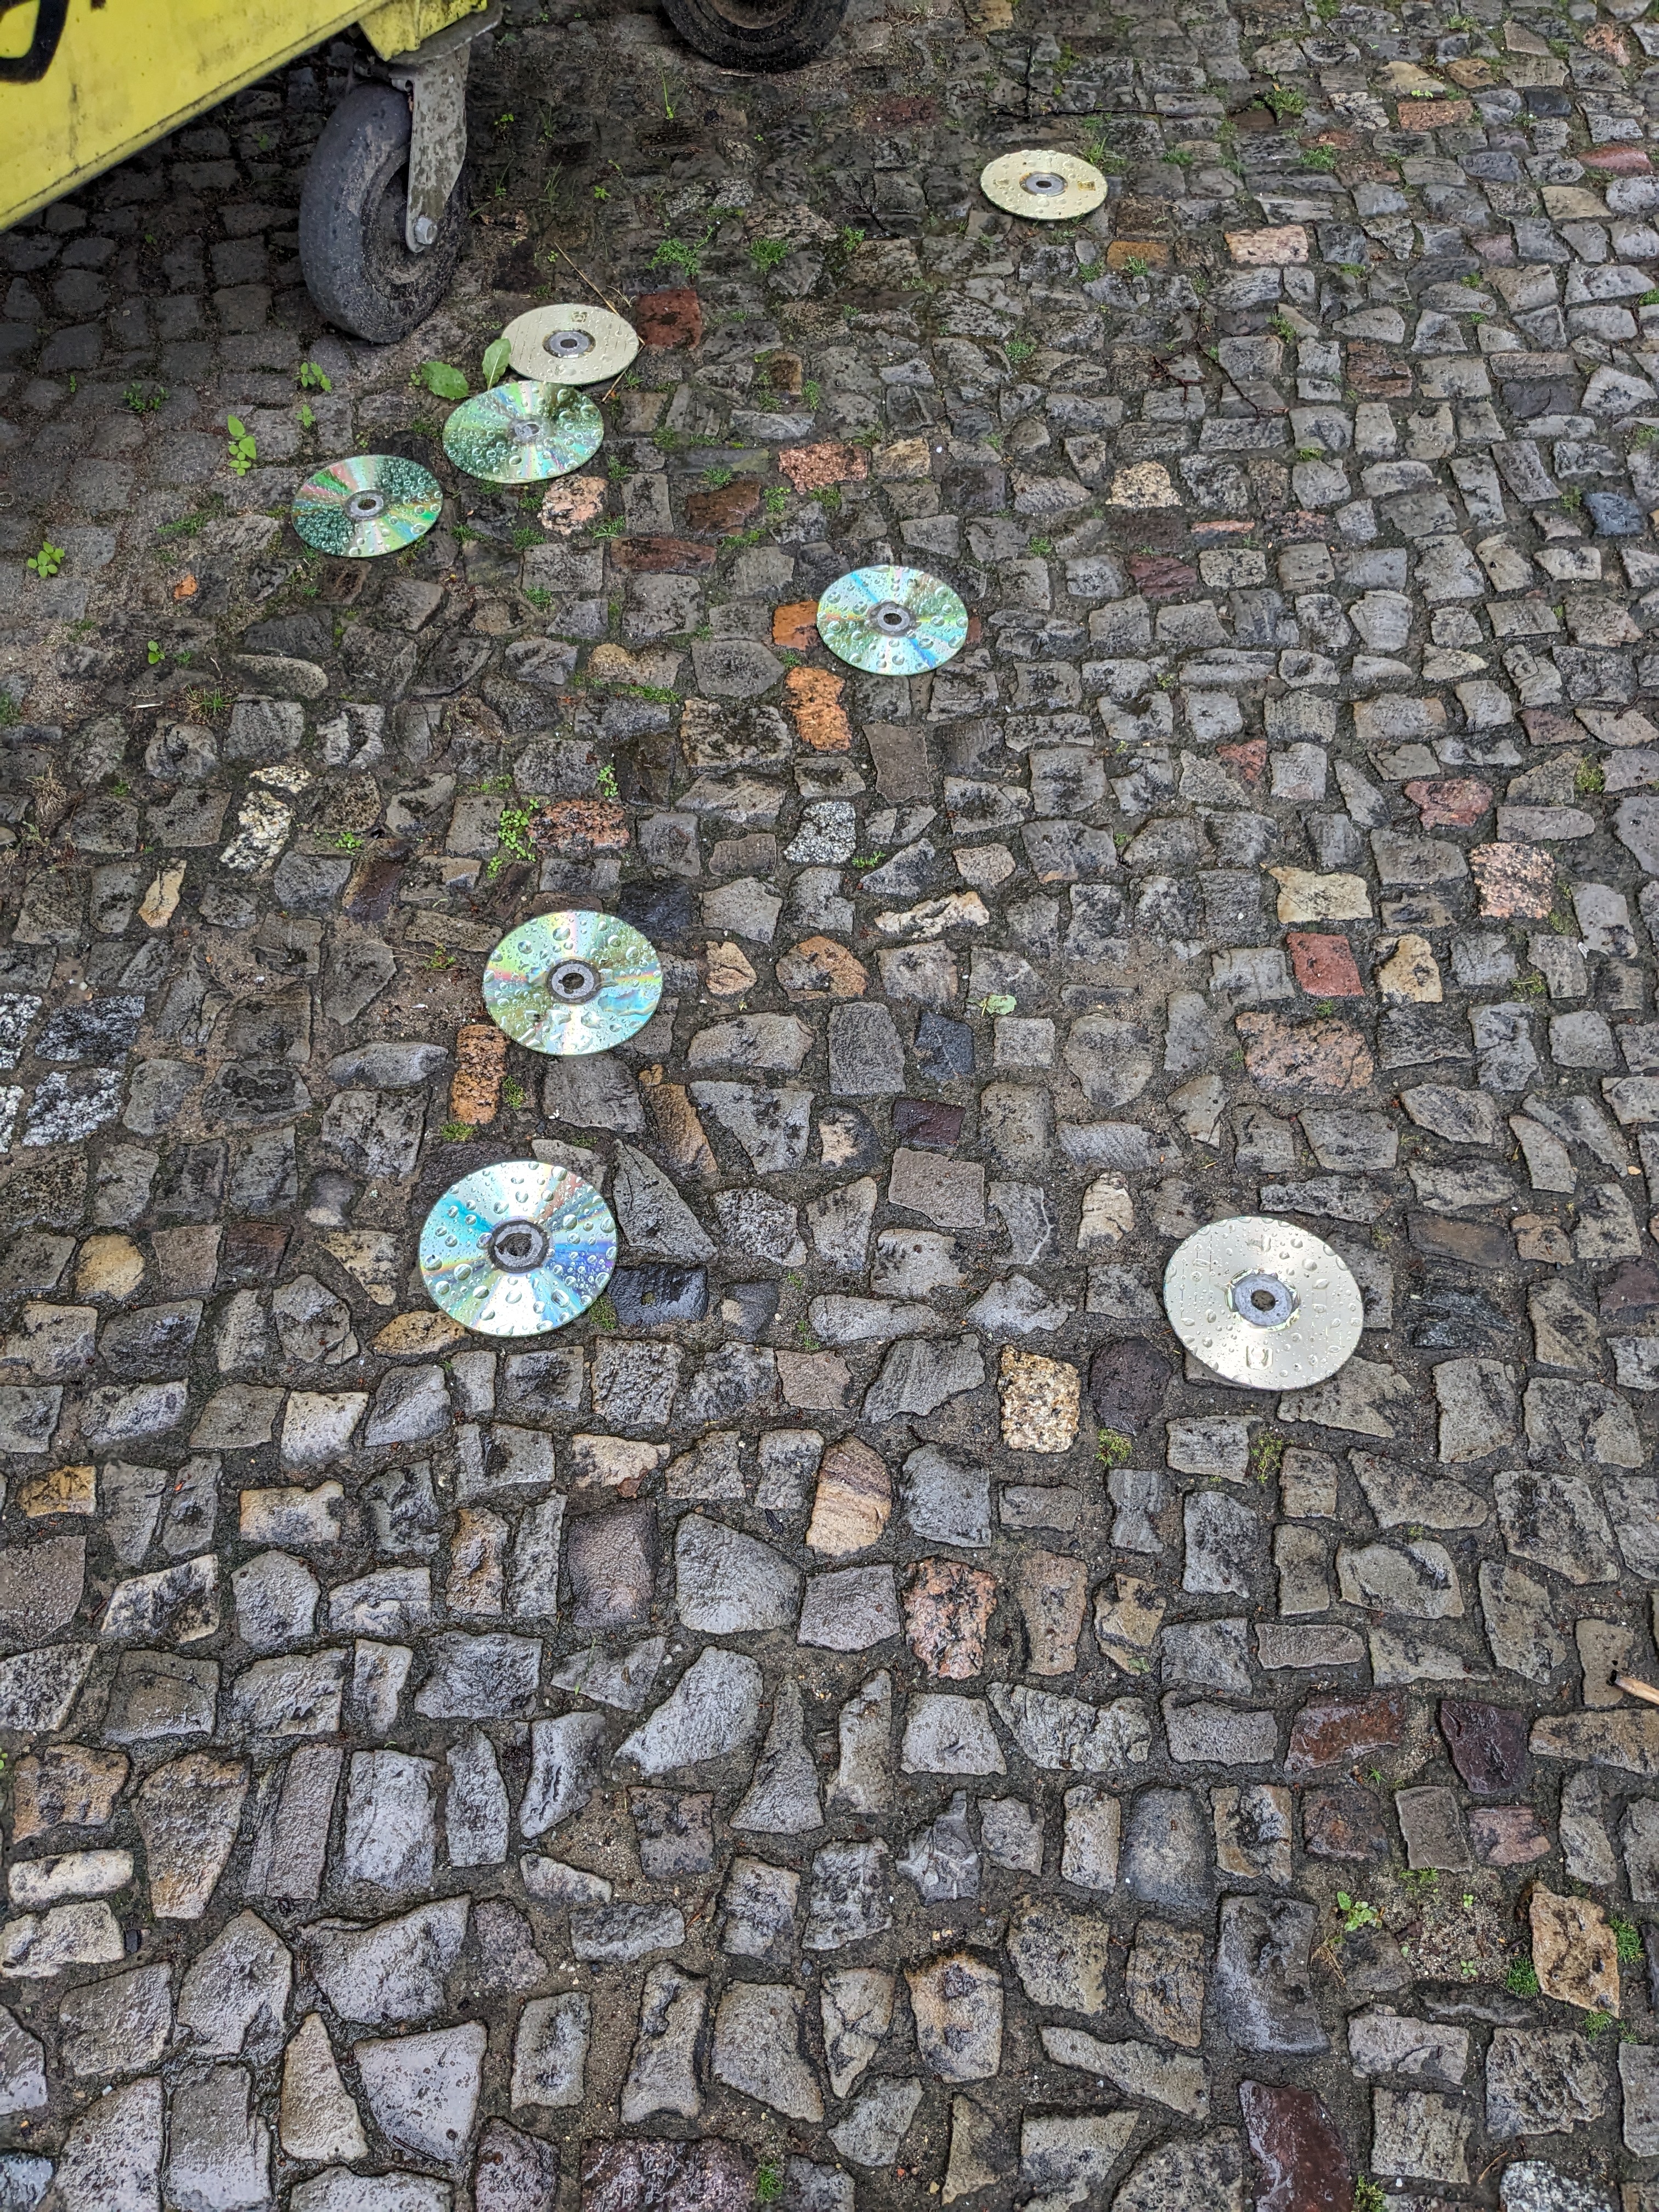 A few CDs on the ground, wet